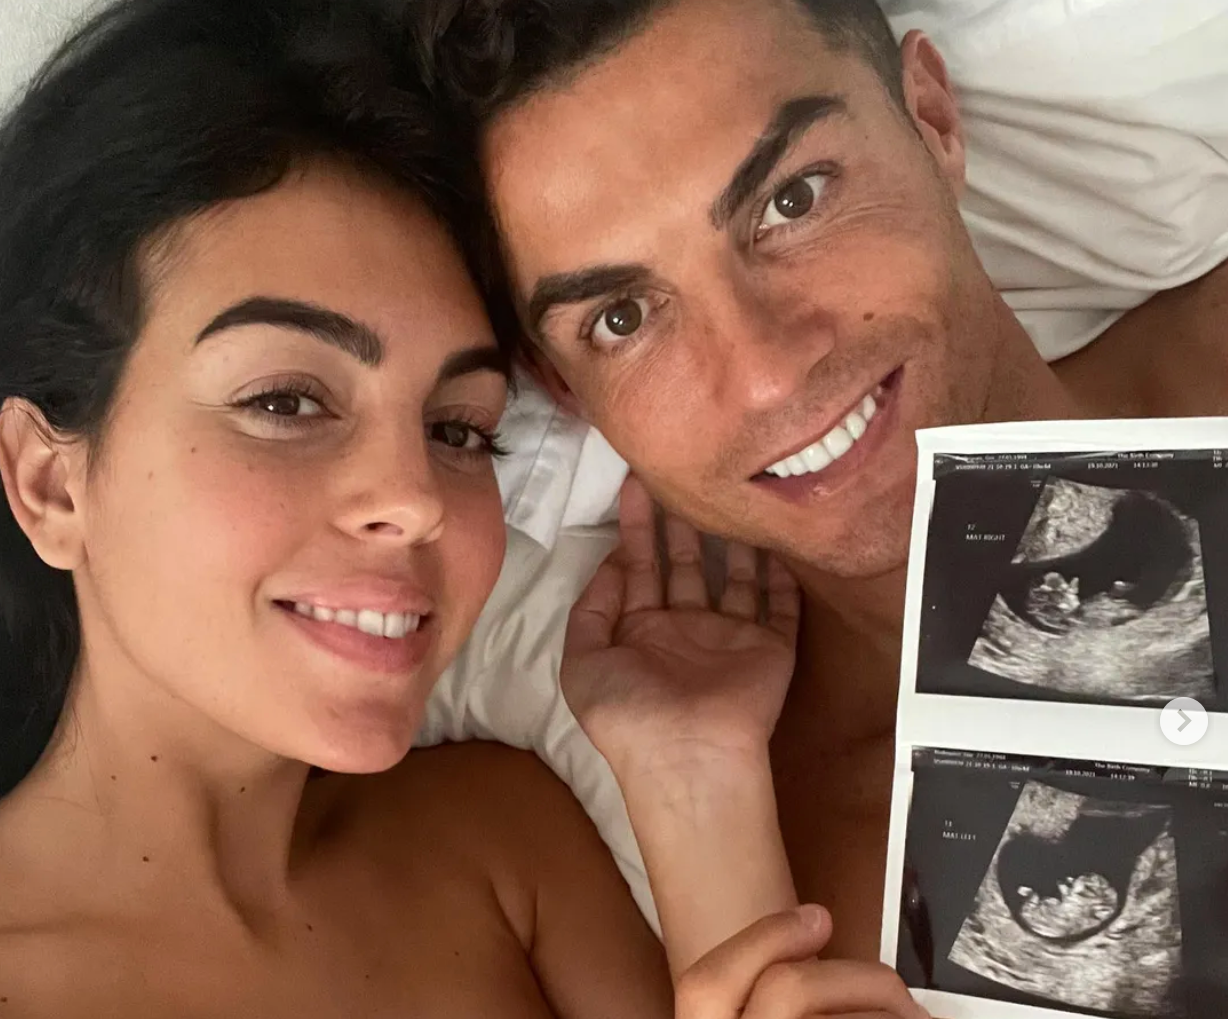 Cristiano Ronaldo shares first picture with newborn daughter after loss of her twin, The Manc